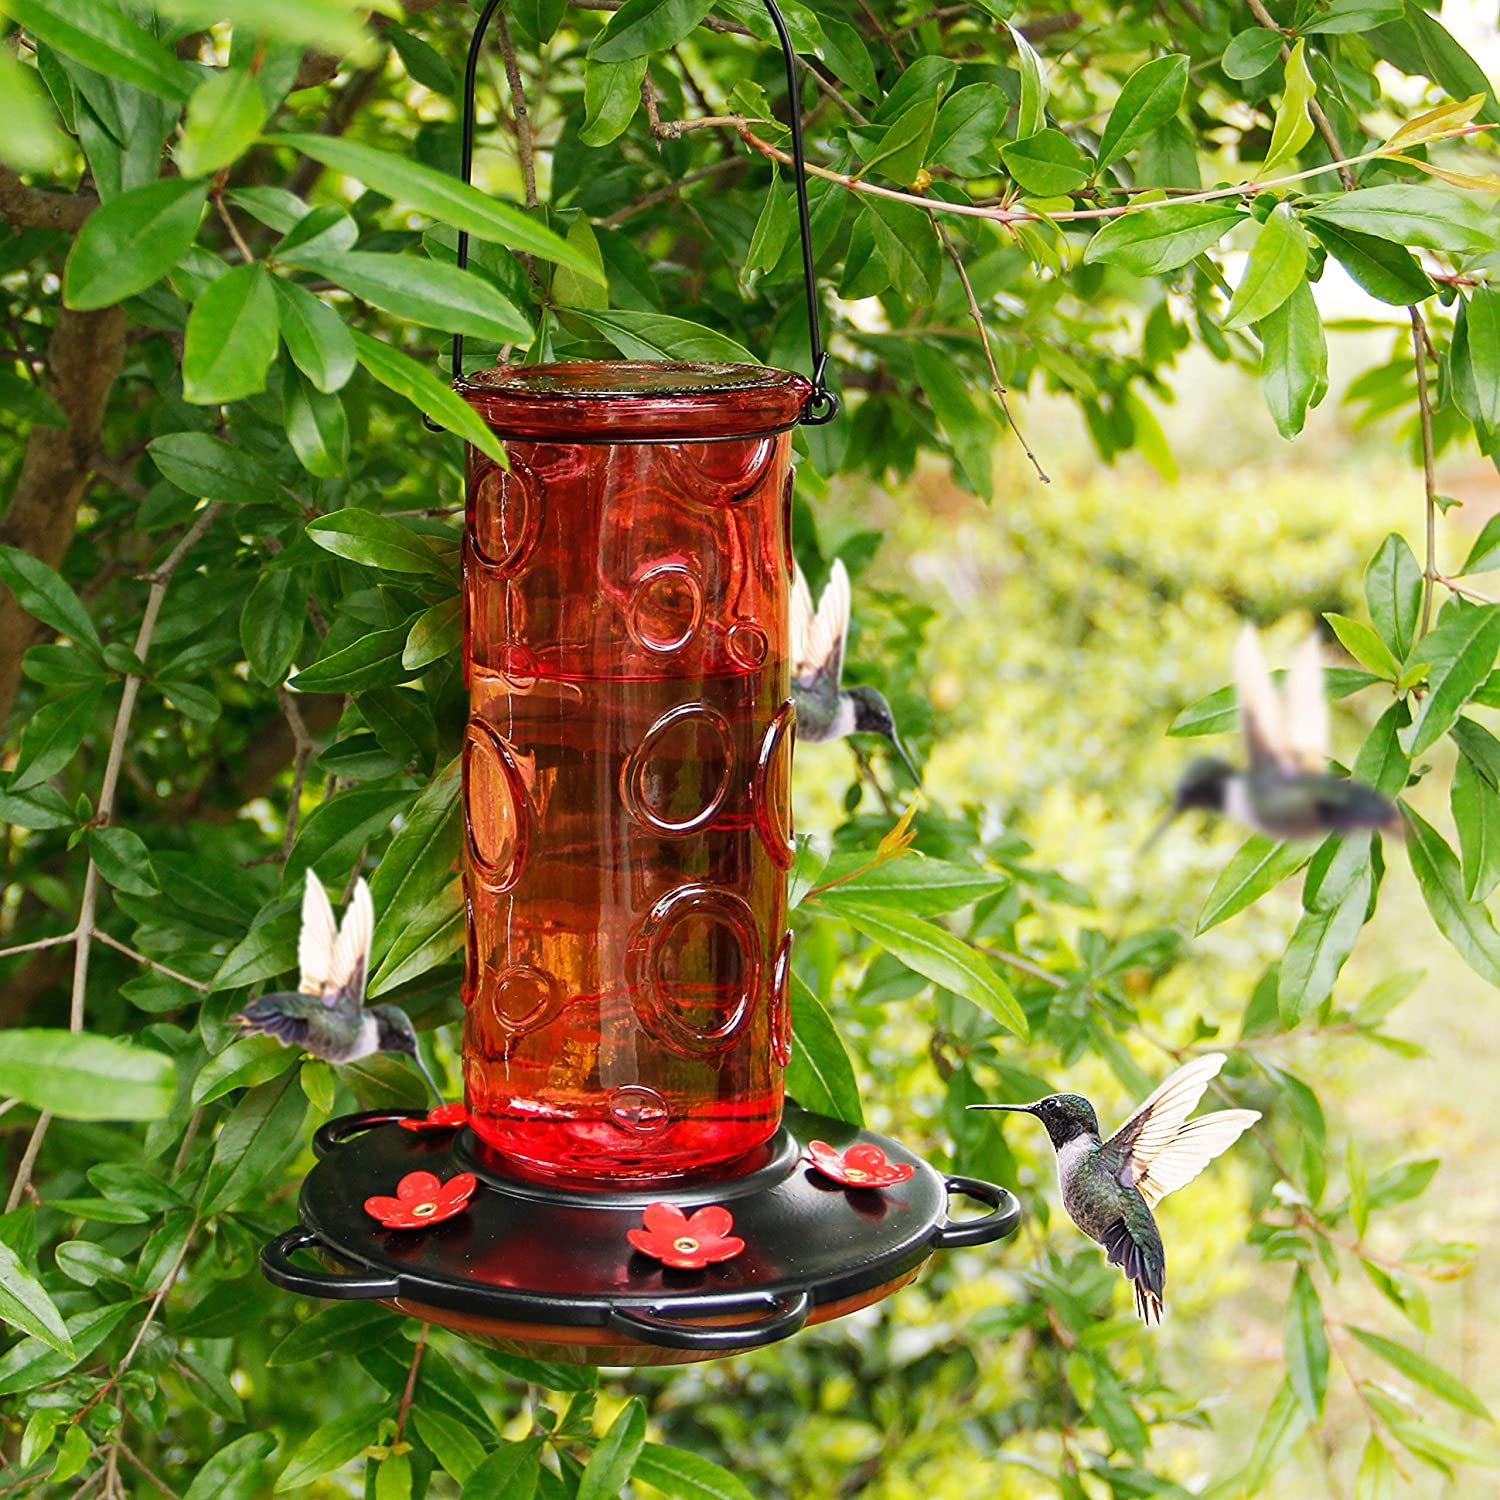 28 oz Glass Hummingbird Feeders for Outdoors, Wild Bird Feeder with 5 Feeding Ports, Metal Handle Hanging for Outdoor Garden Tree Yard, Red